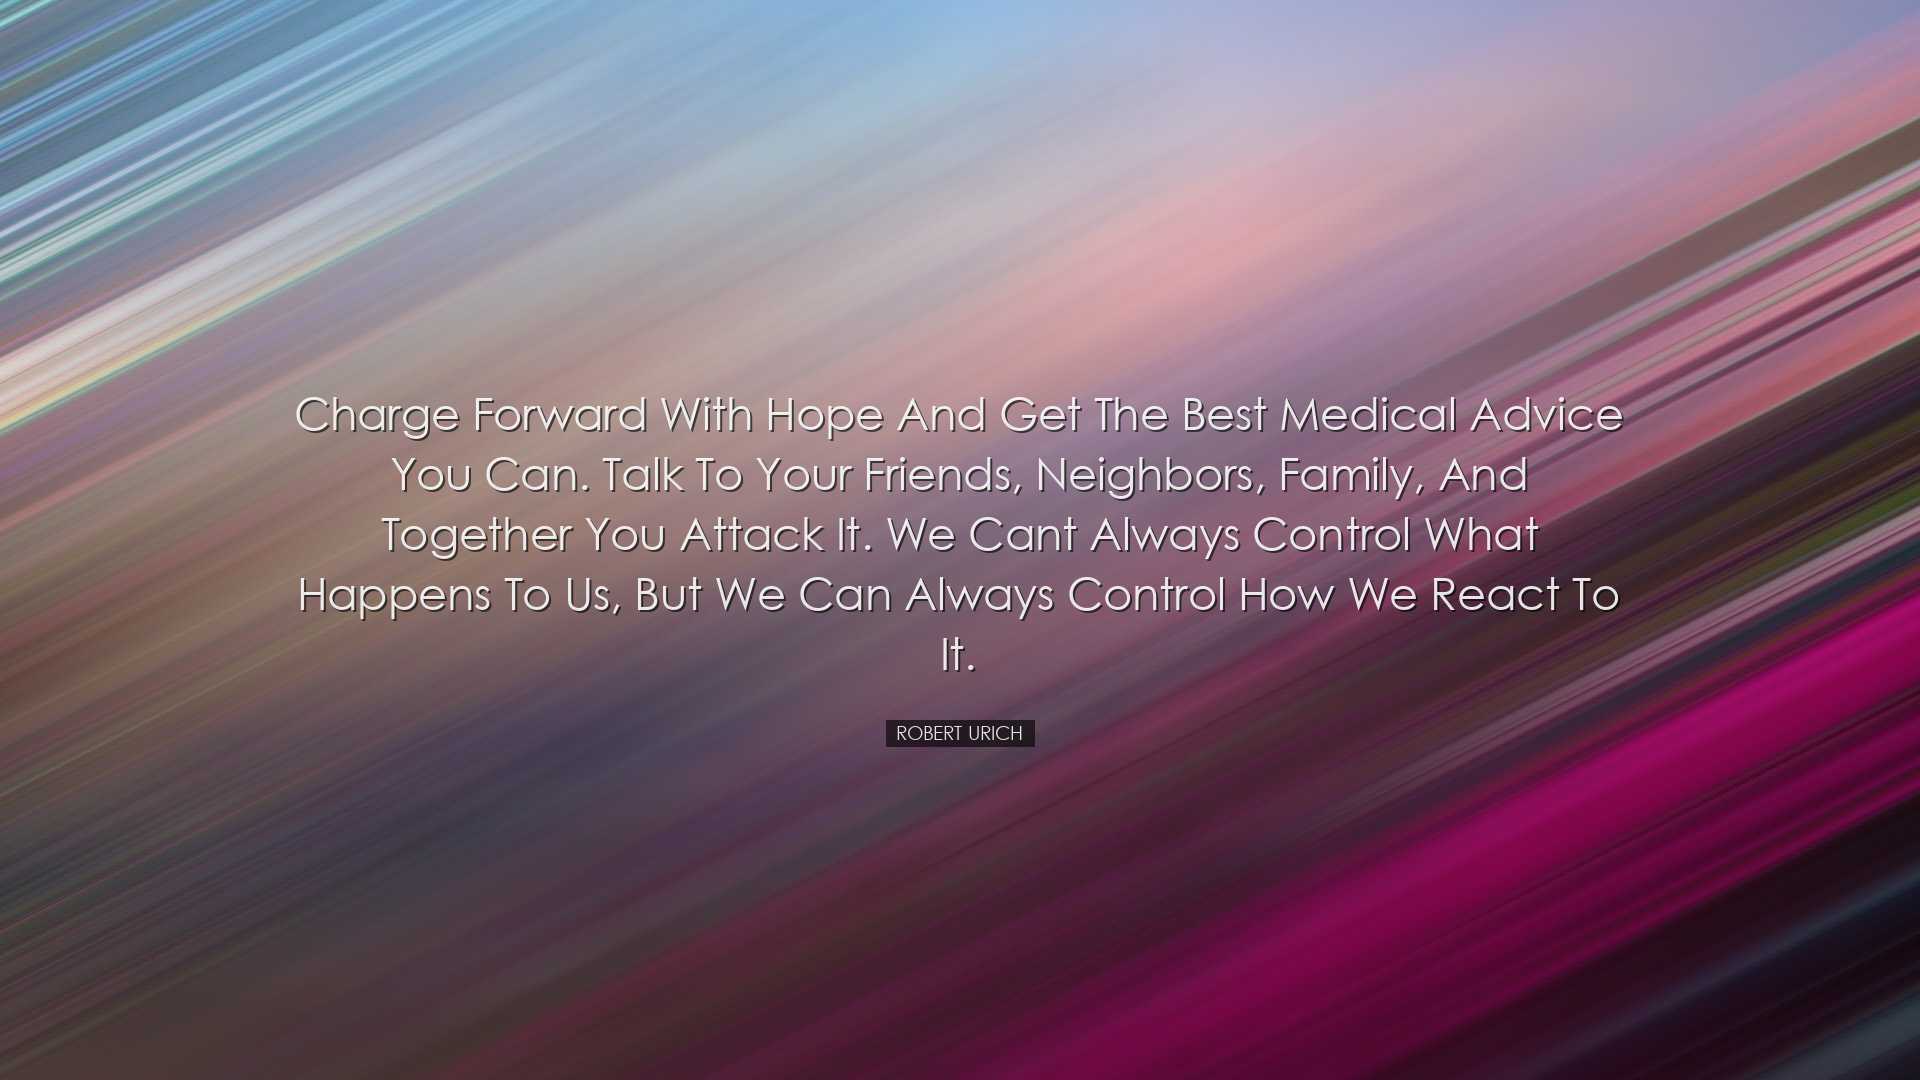 Charge forward with hope and get the best medical advice you can.